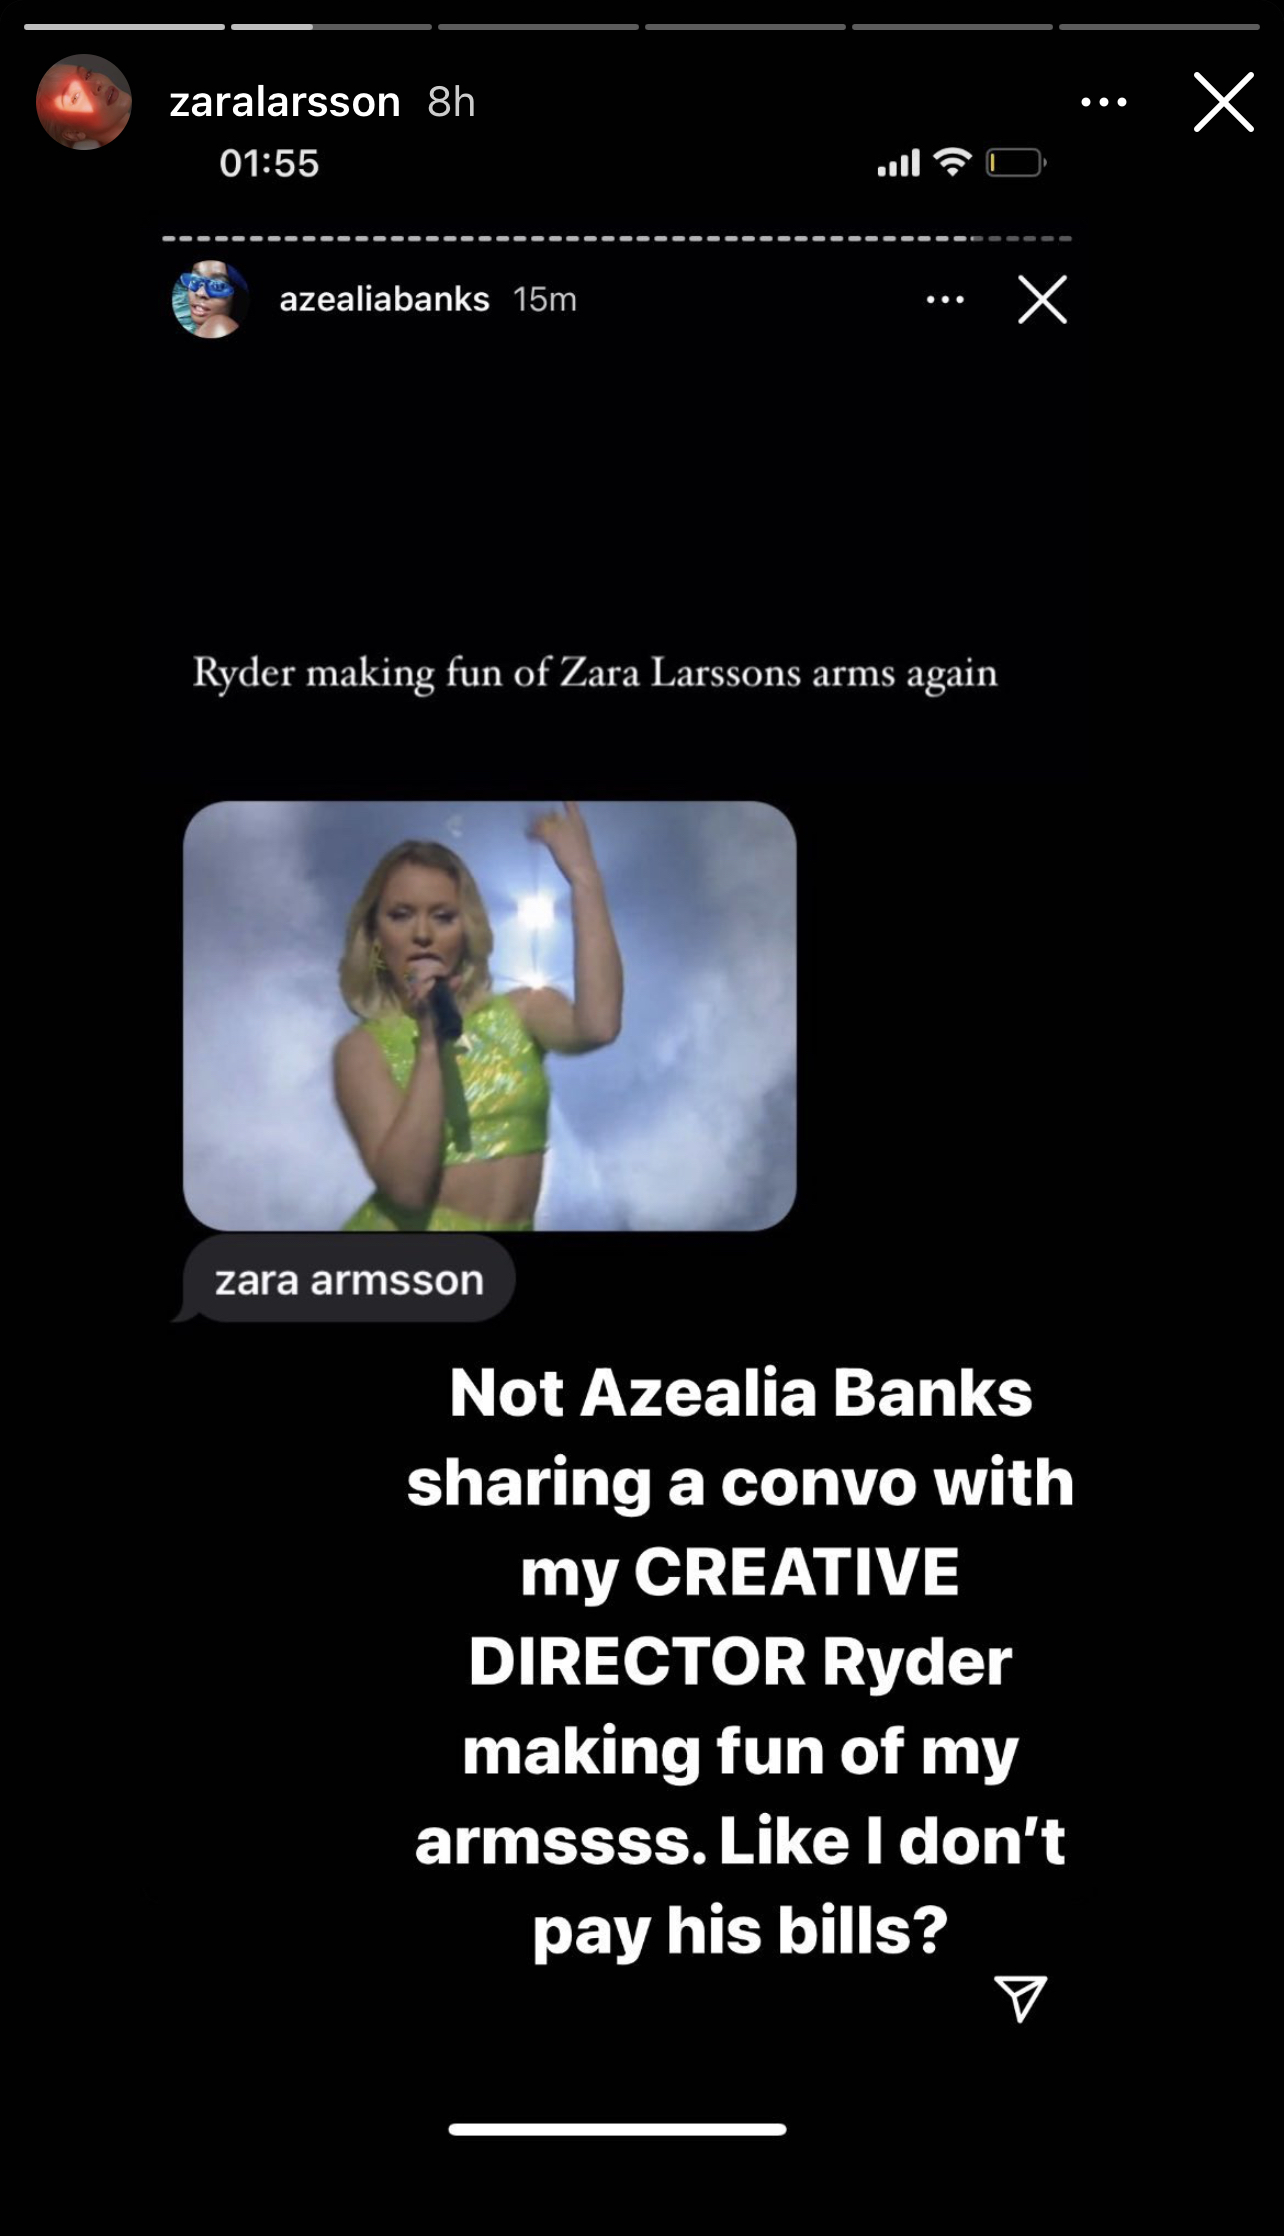 "Ryder" making fun och Zara Larssons arms again, "Zara Armsson" Not Azealia Banks sharing a convo with my Cretive Director Ryder, making fun of my arms. Like I don't pay his bills?